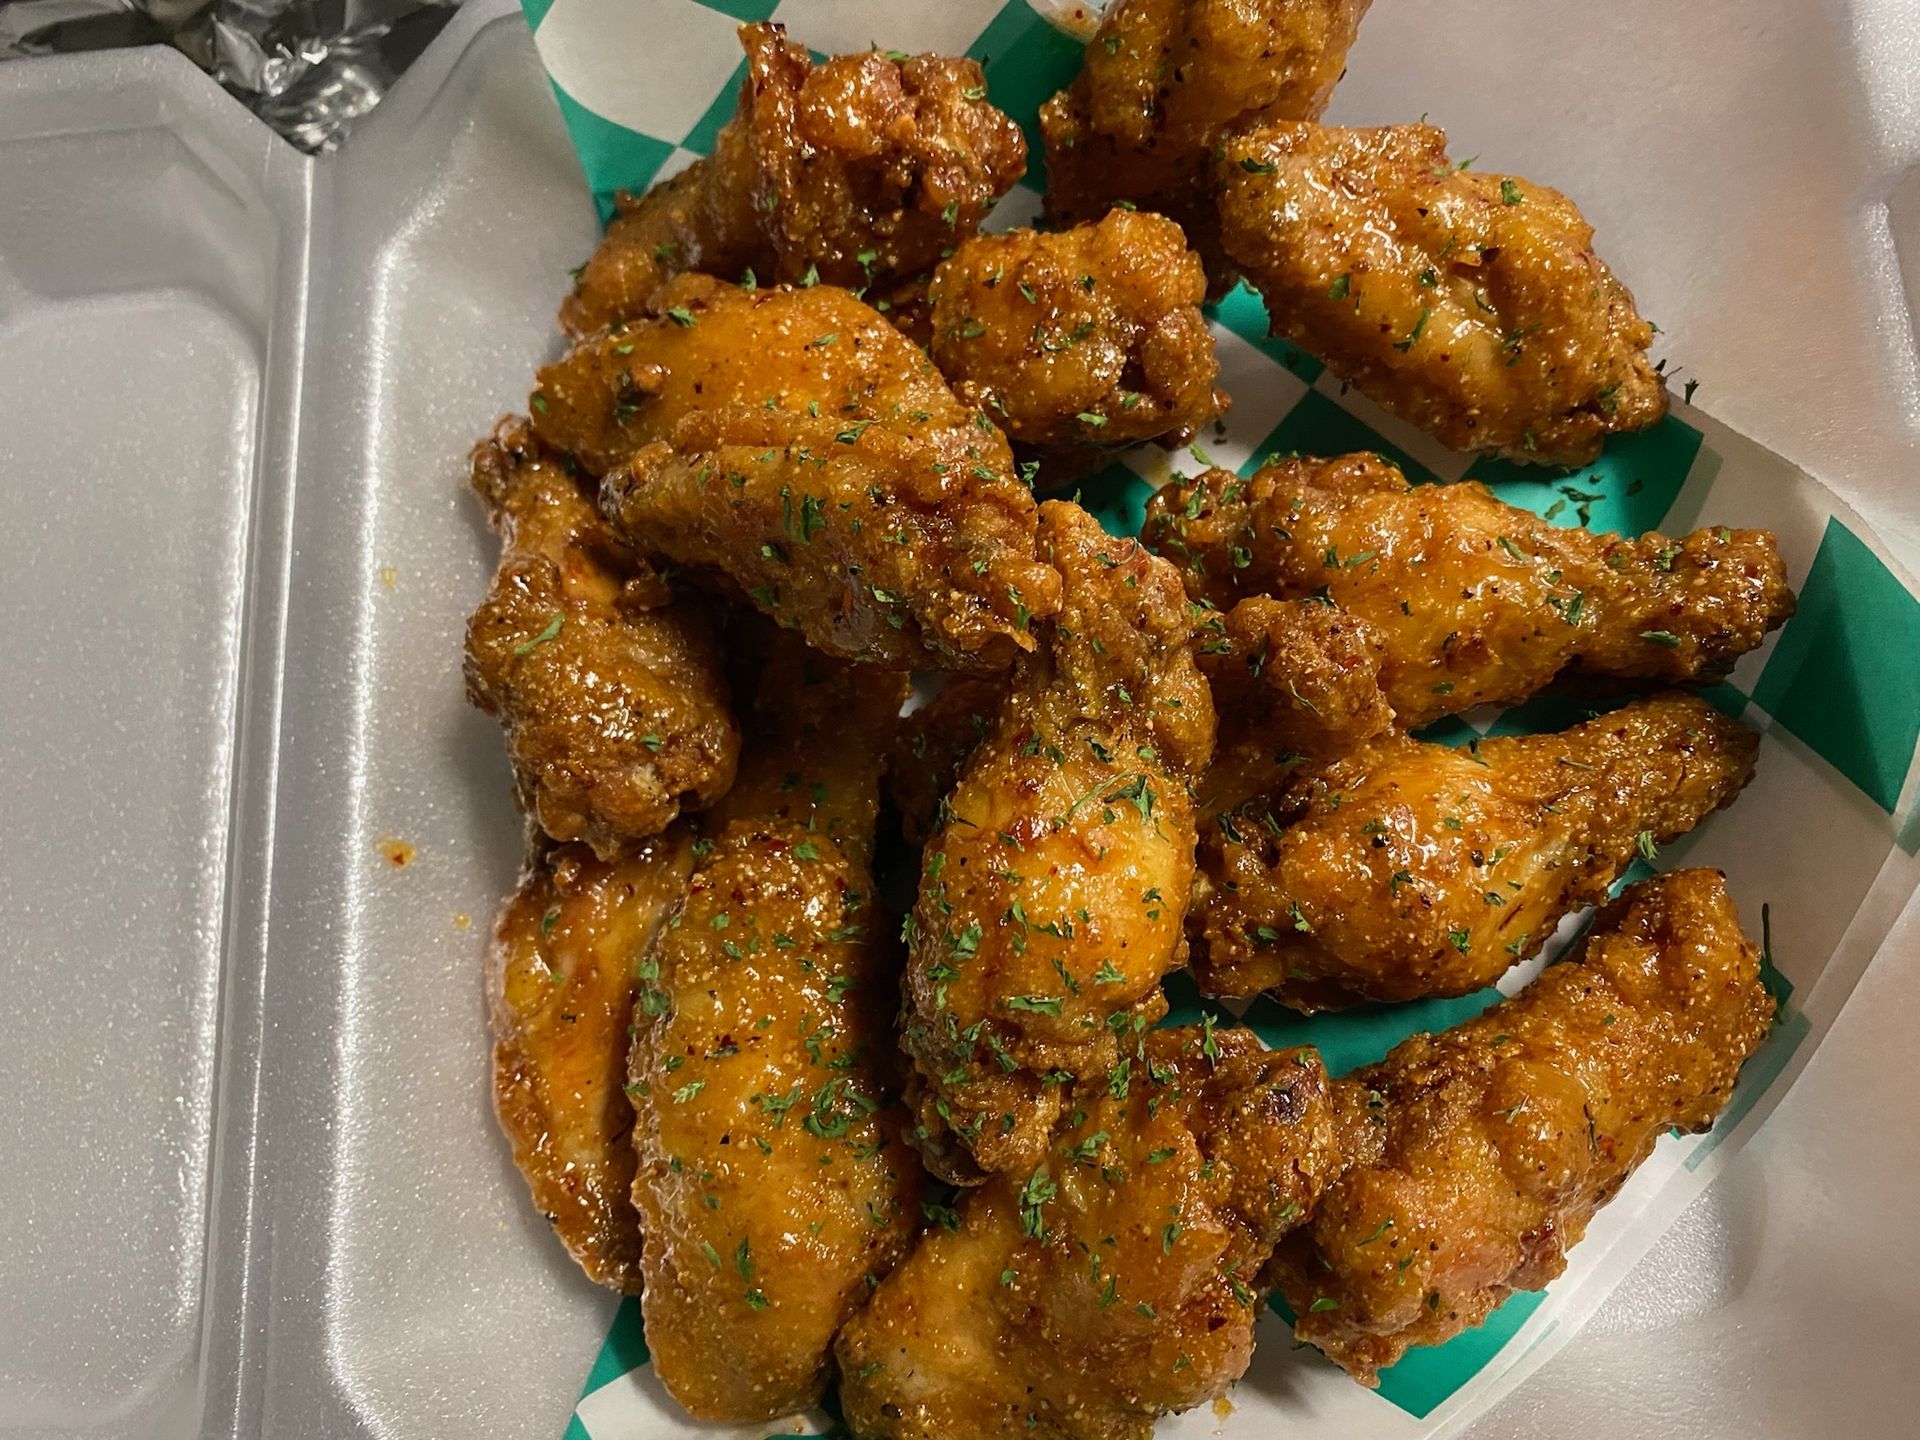 A tray of fried chicken wings in a styrofoam container.